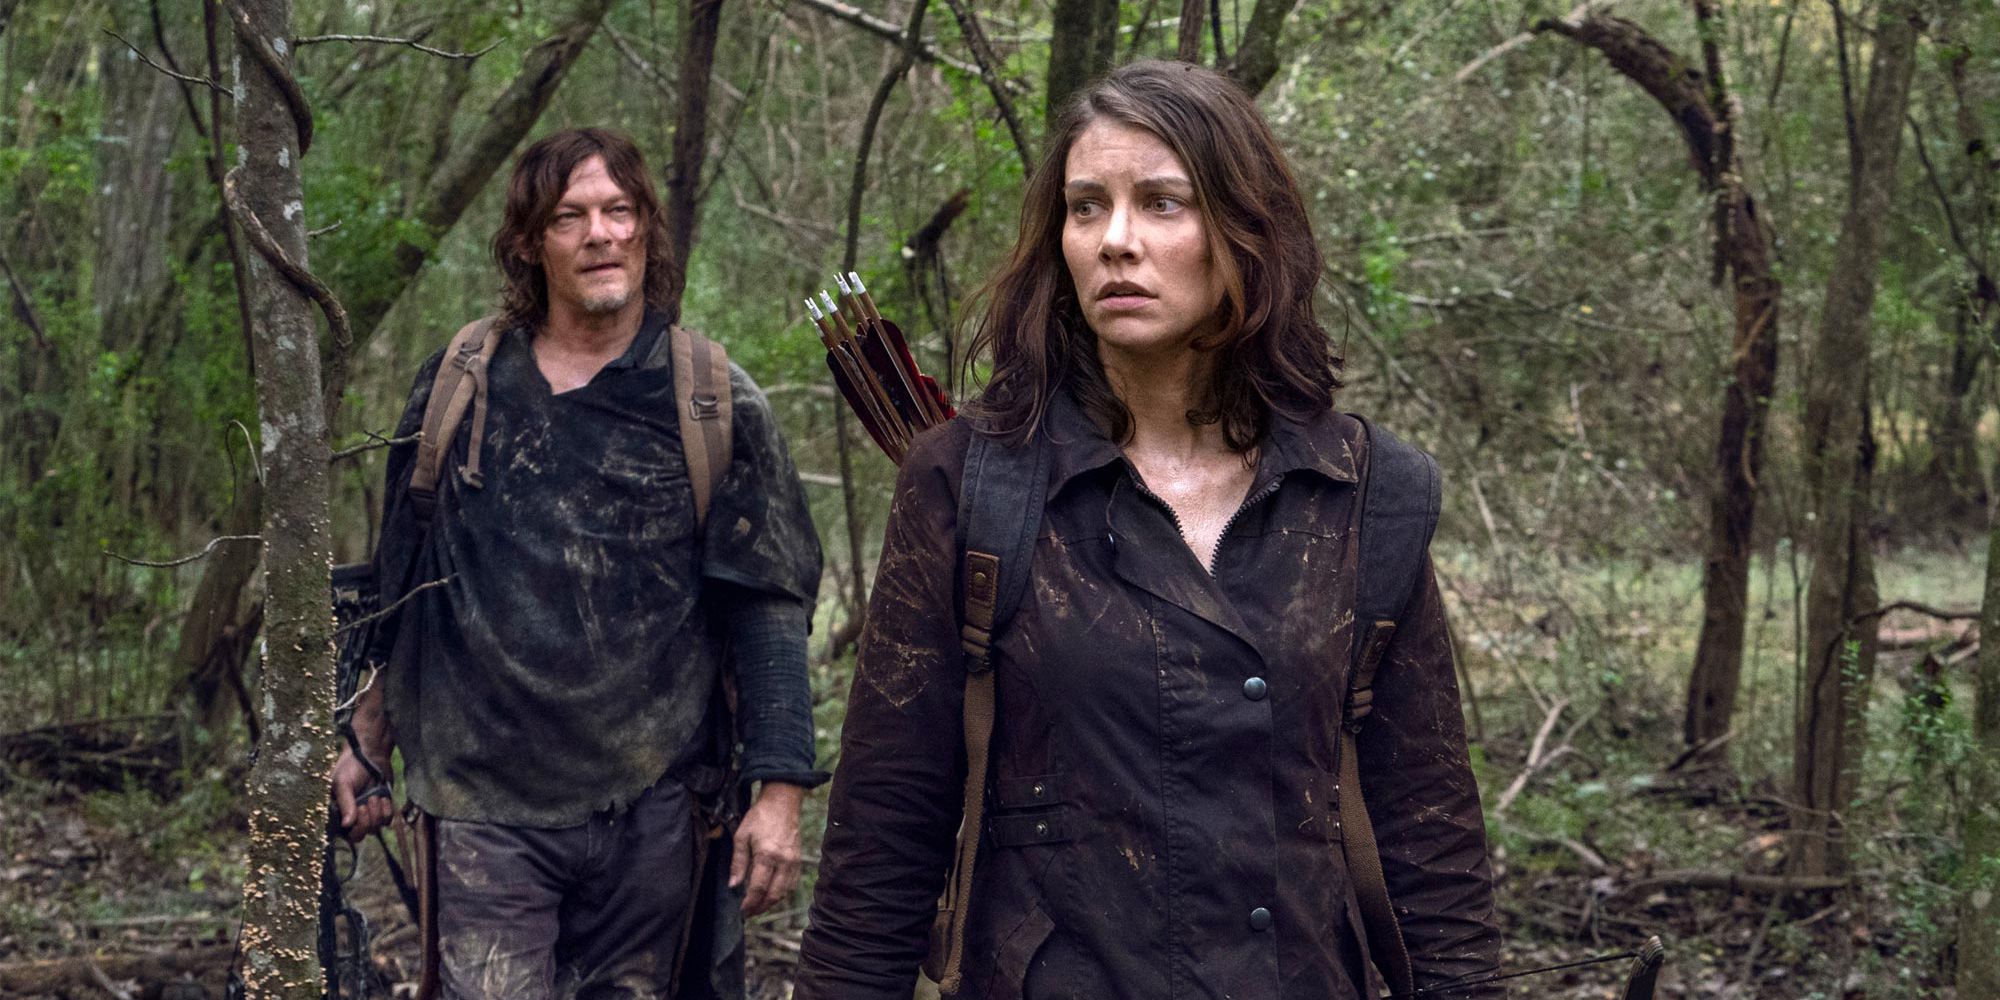 Maggie Greene and Daryl Dixon from The Walking Dead